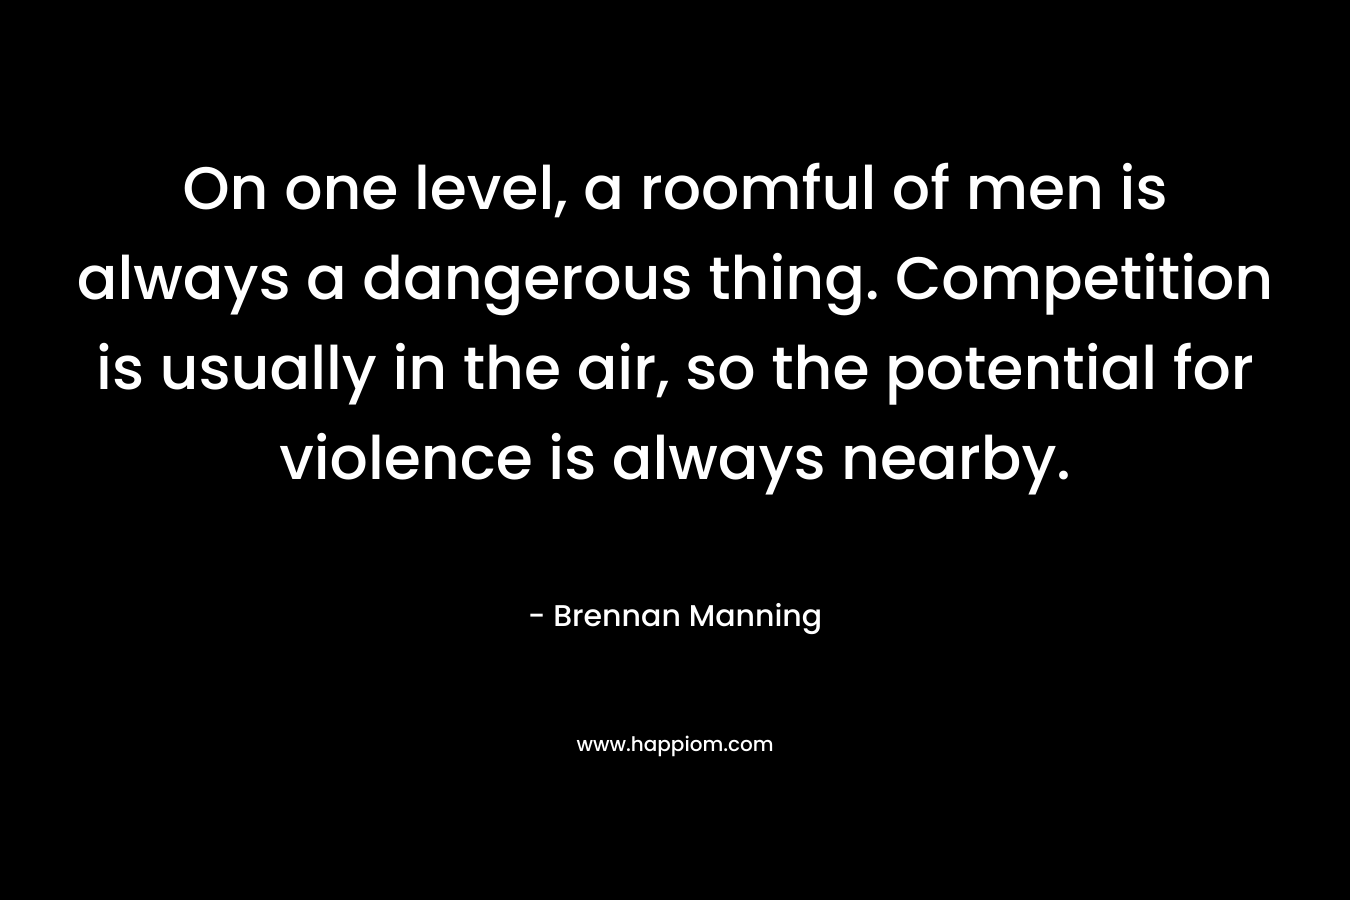 On one level, a roomful of men is always a dangerous thing. Competition is usually in the air, so the potential for violence is always nearby. – Brennan Manning